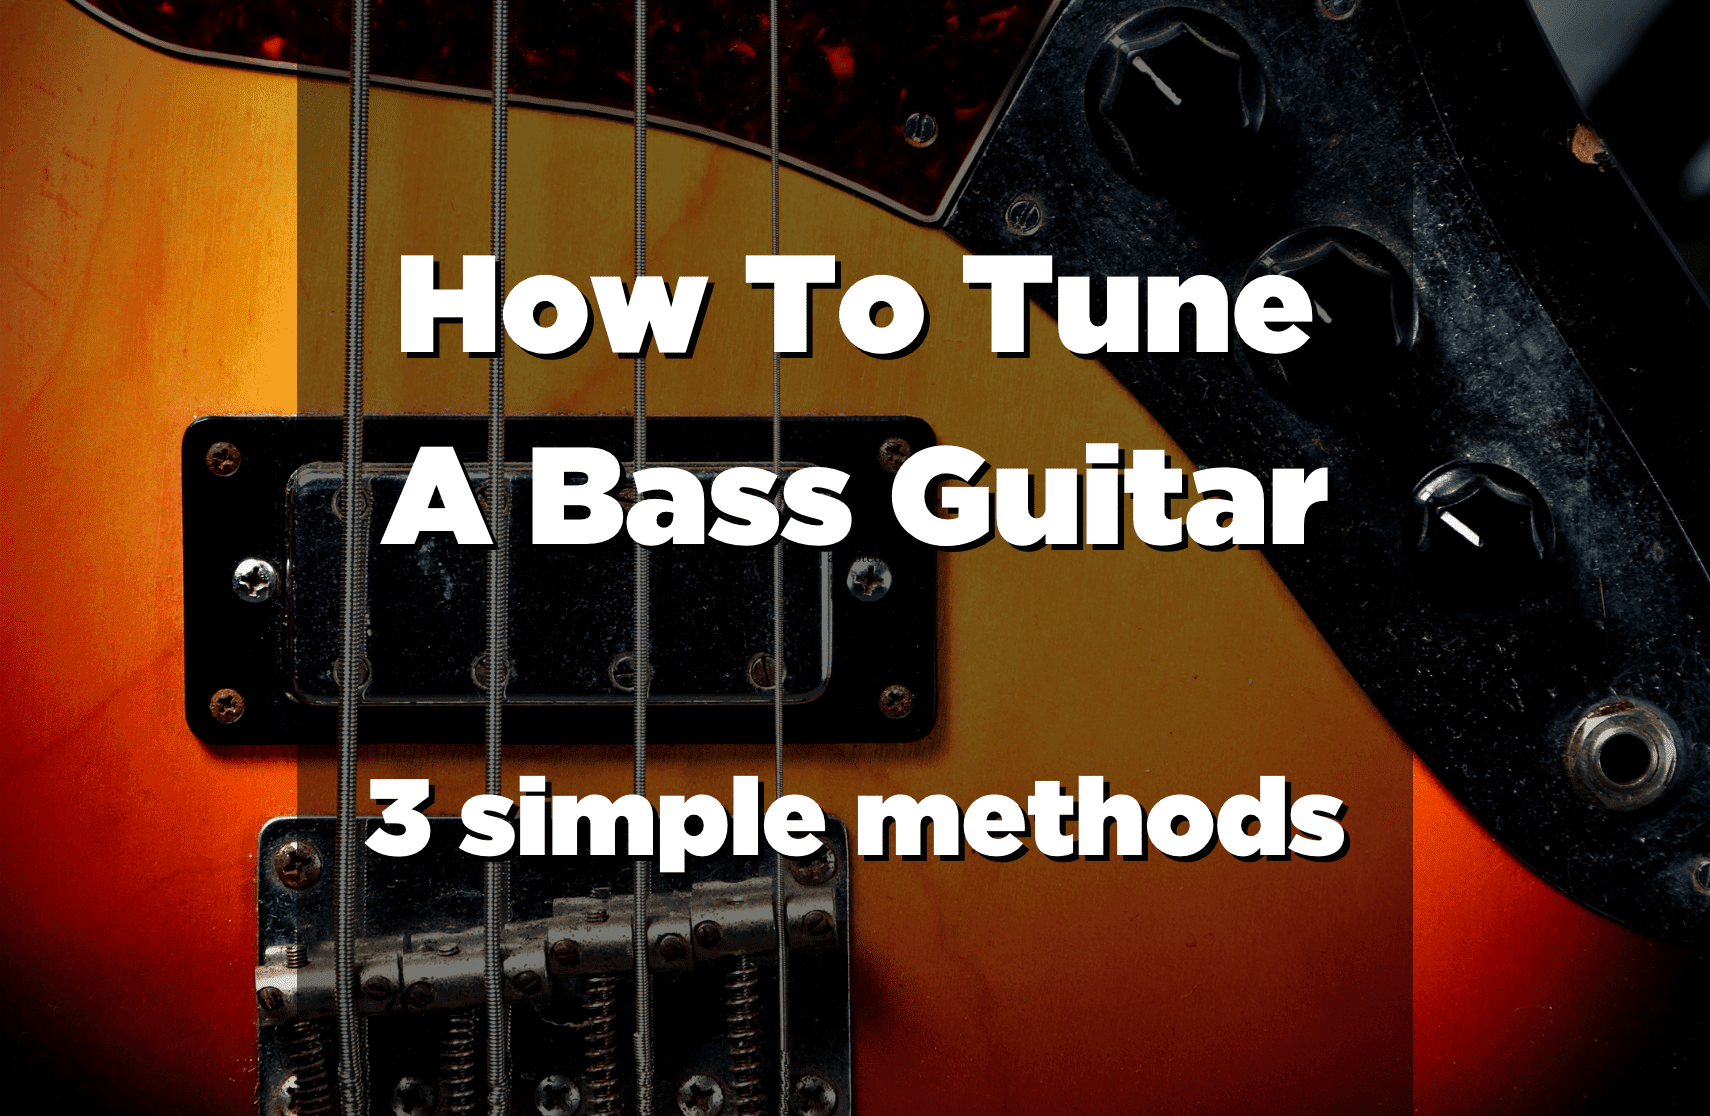 Tune Bass Maniac. Notes Bass for Tuning. String Guide on Bass.